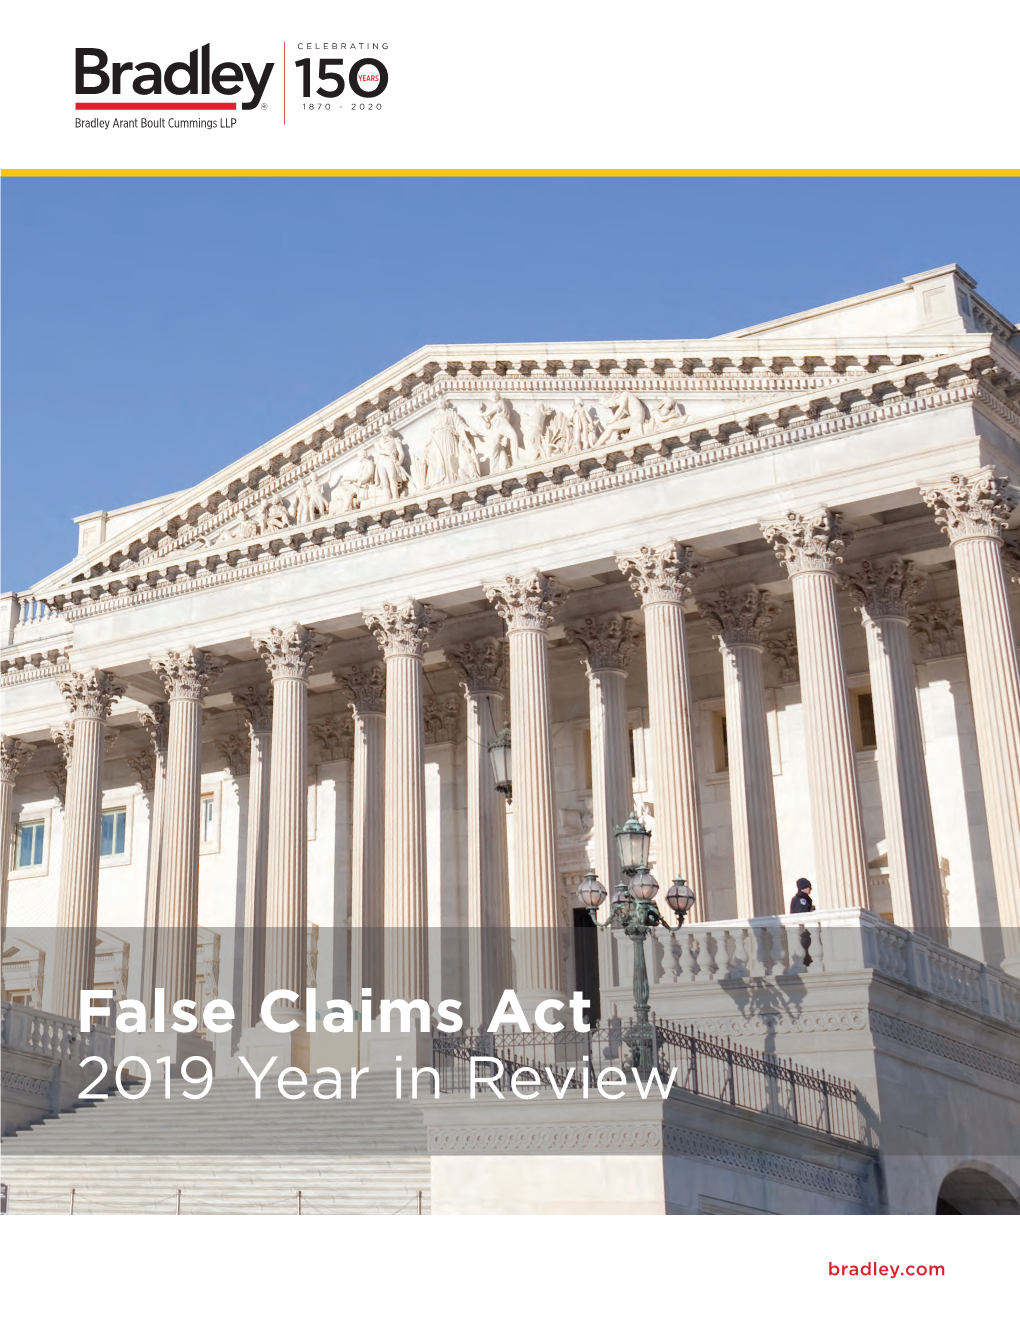 False Claims Act 2019 Year in Review